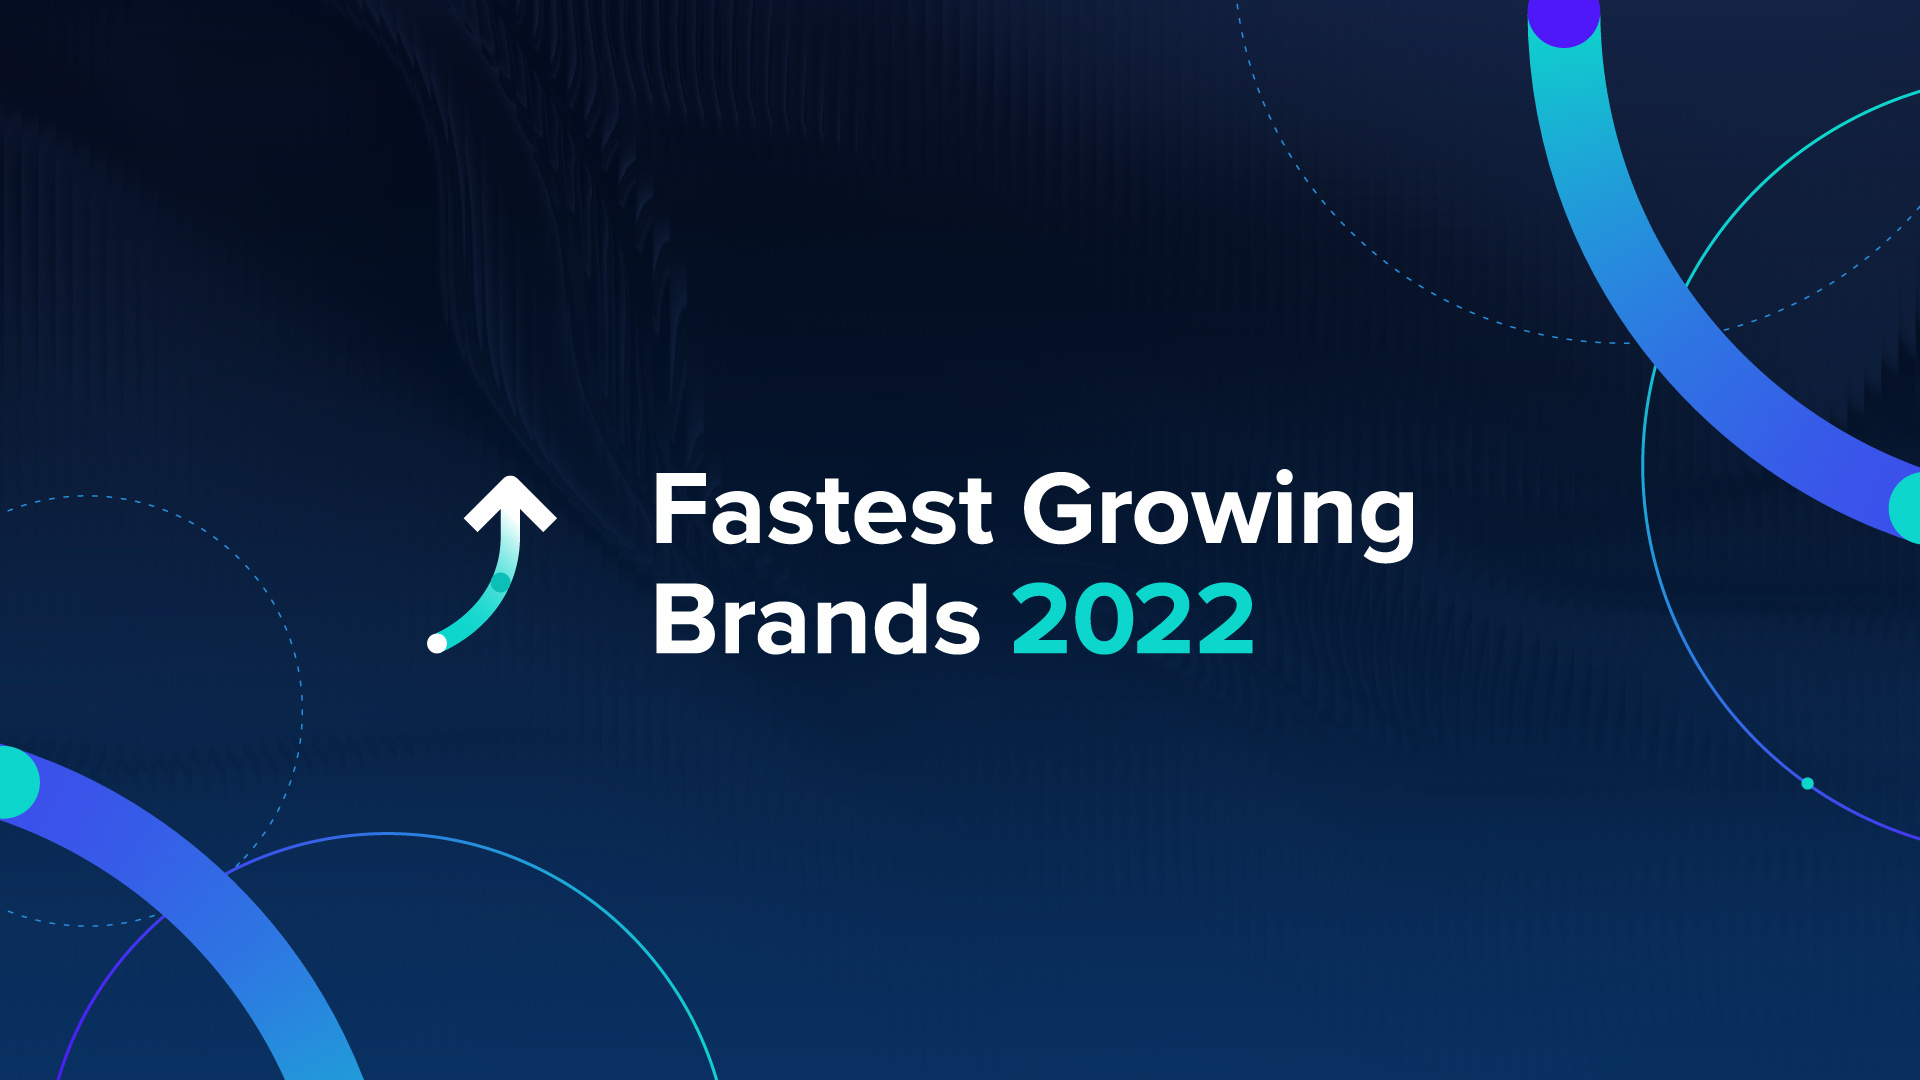 Fastest Growing Brands 2022